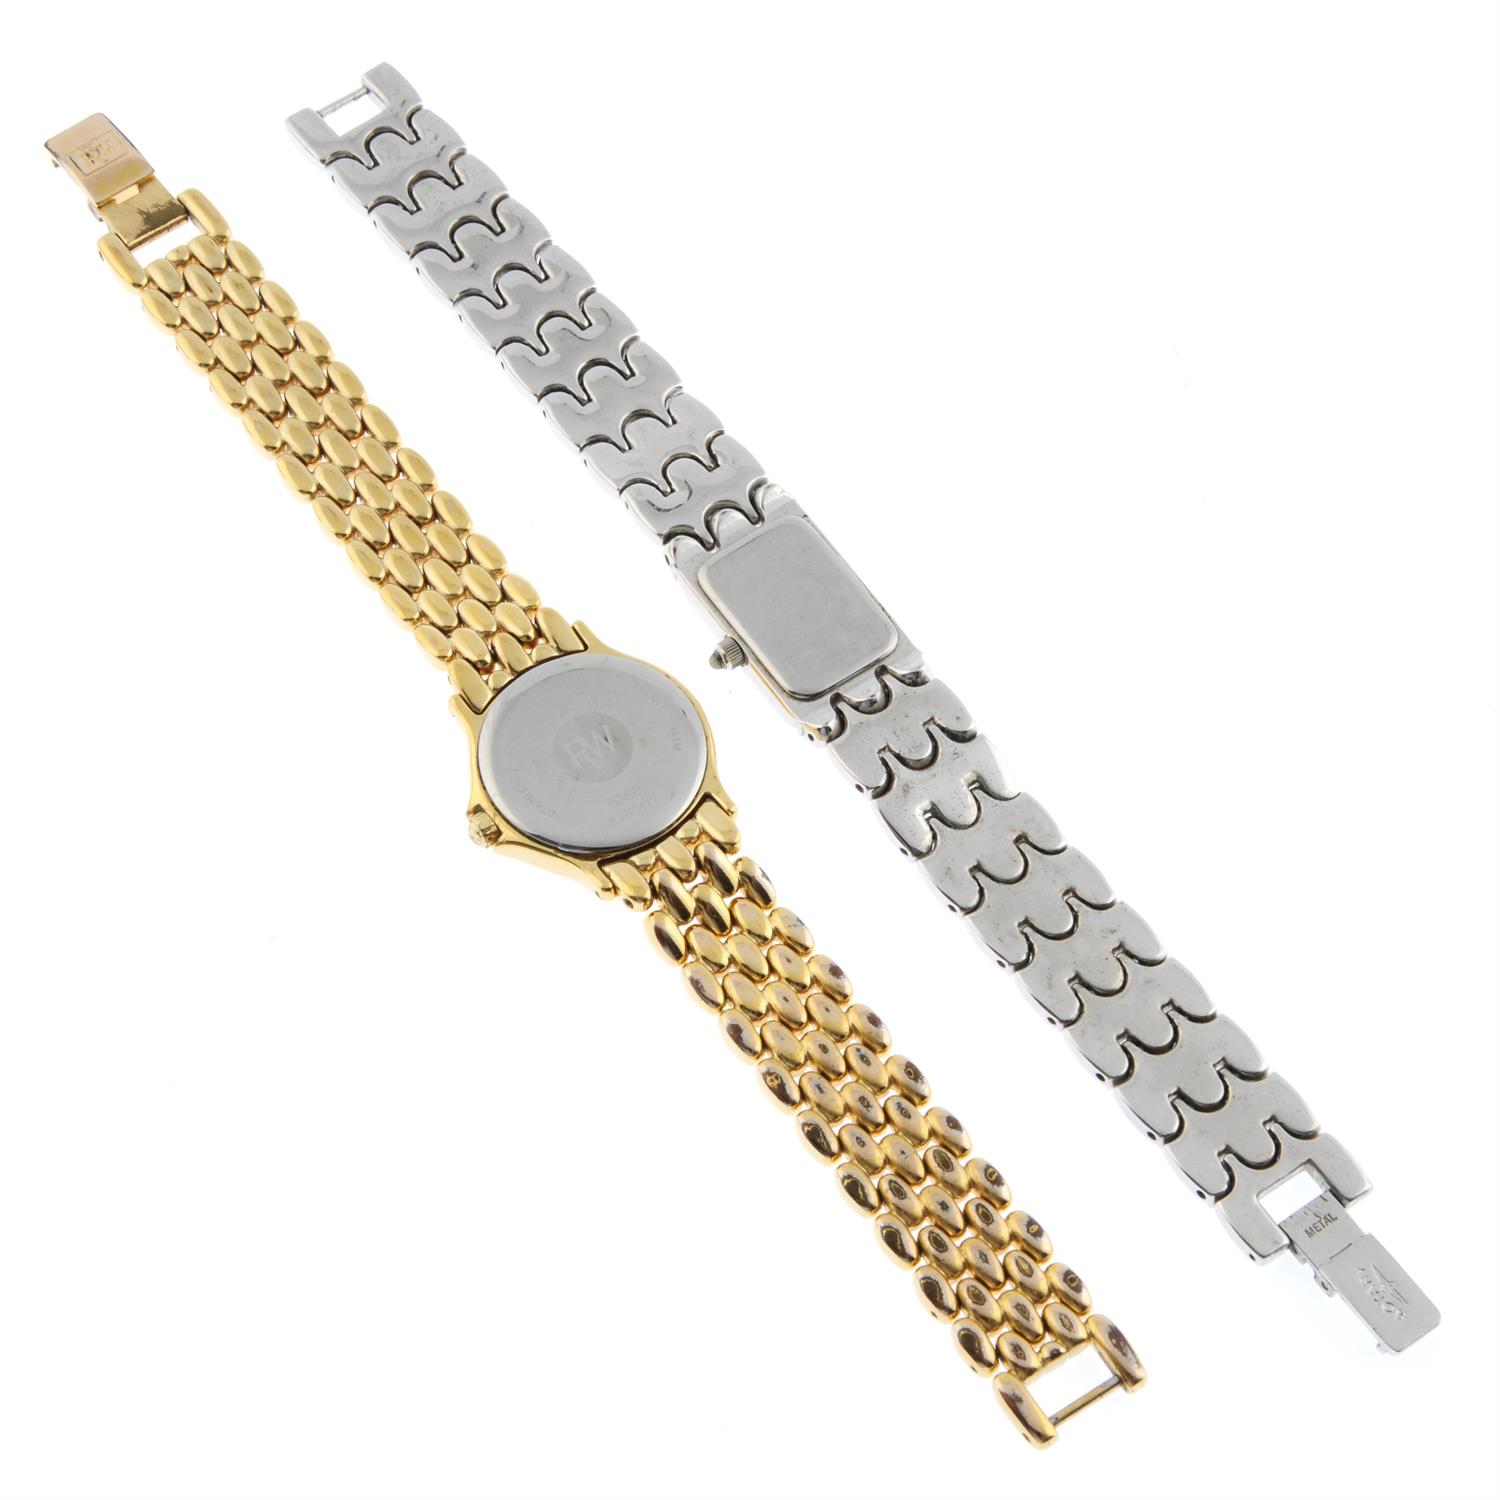 RAYMOND WEIL - a gold plated Chorus bracelet watch (24mm) together with a Rotary bracelet watch. - Image 2 of 3